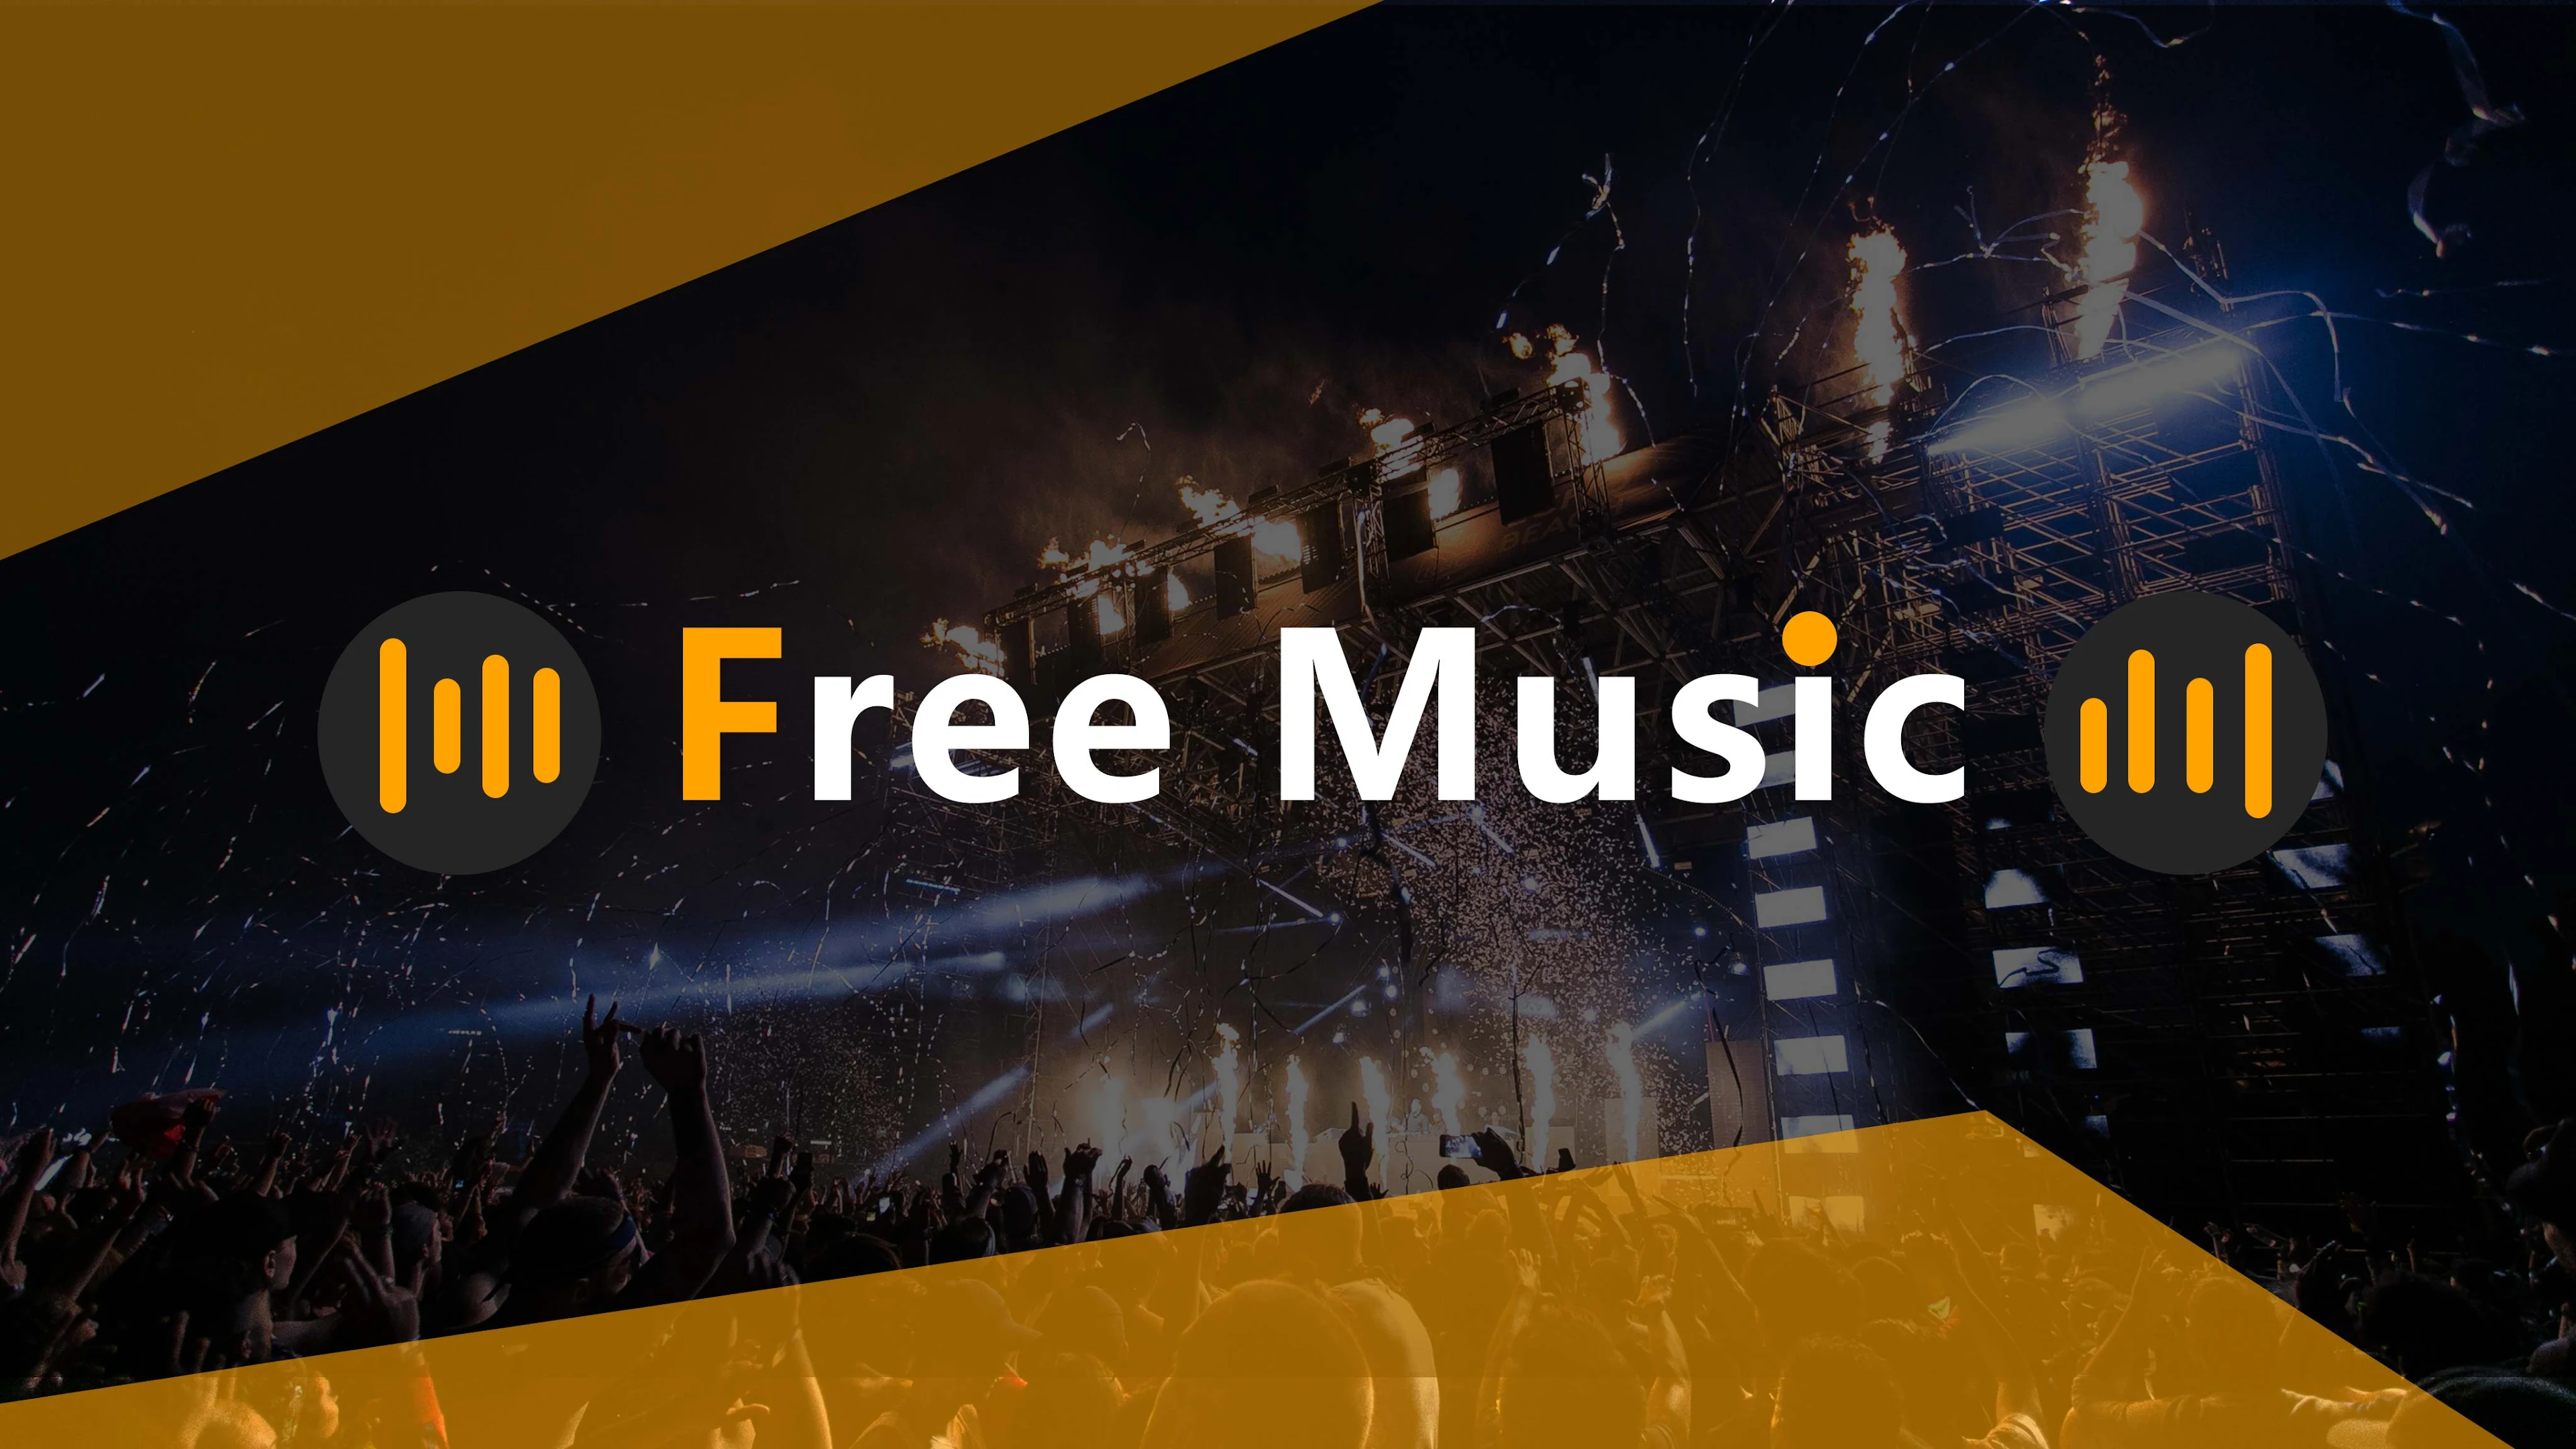 Free Music - music downloader - Apps on Google Play